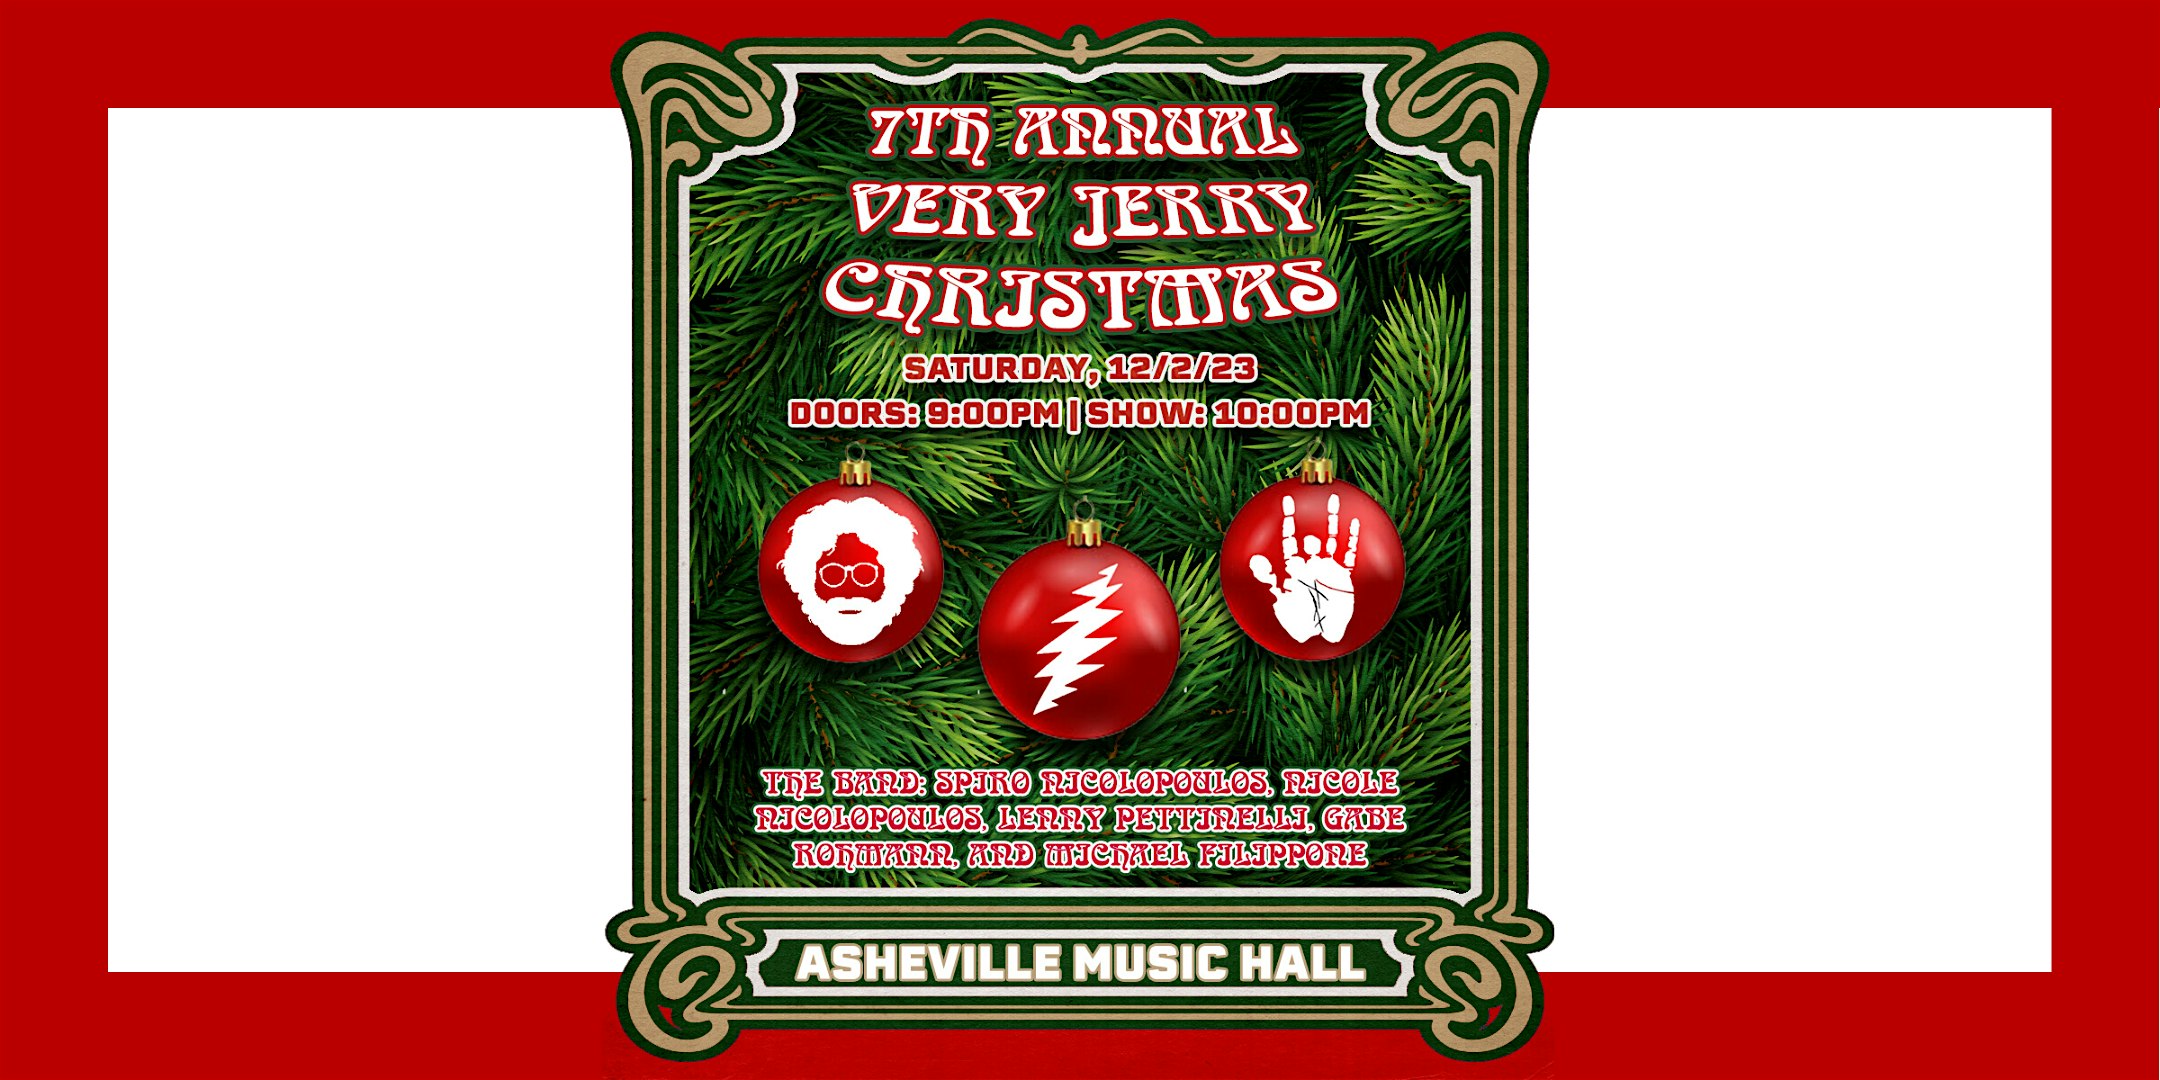 The 7th Annual Very Jerry Xmas!